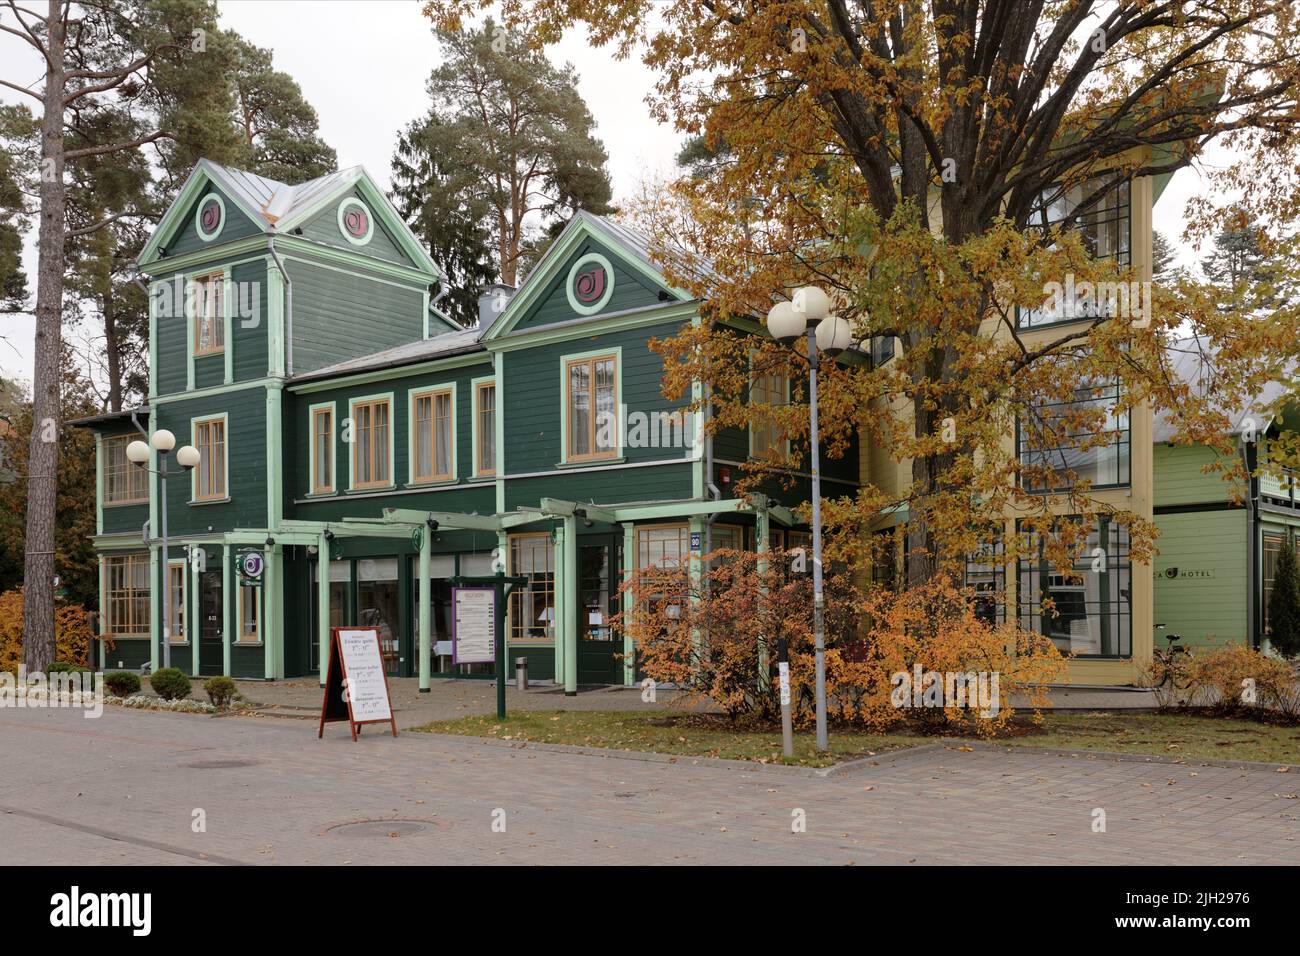 Exterior of 'Villa Joma' hotel in Yurmala, Latvia, the restored wooden villa served as small hotel since the end of 19th century Stock Photo